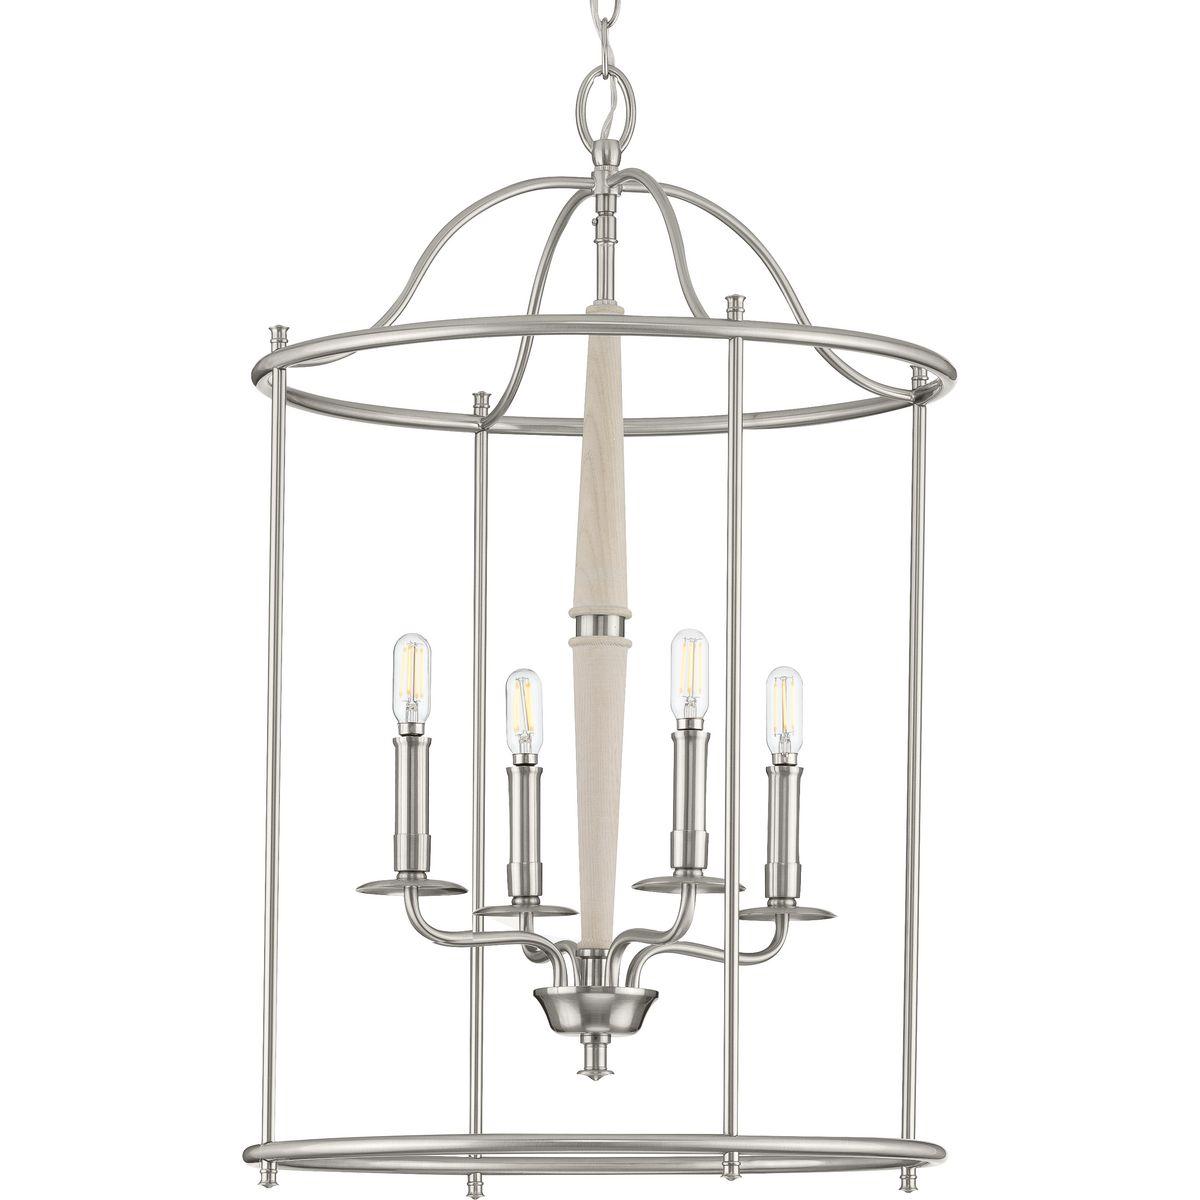 Hubbell P500210-009 This versatile foyer light from the Durrell Collection will easily find a home in a variety of settings in need of generous illumination. An elongated, open-cage frame coated in a farmhouse-style brushed nickel finish adds visual height to the design. Ins